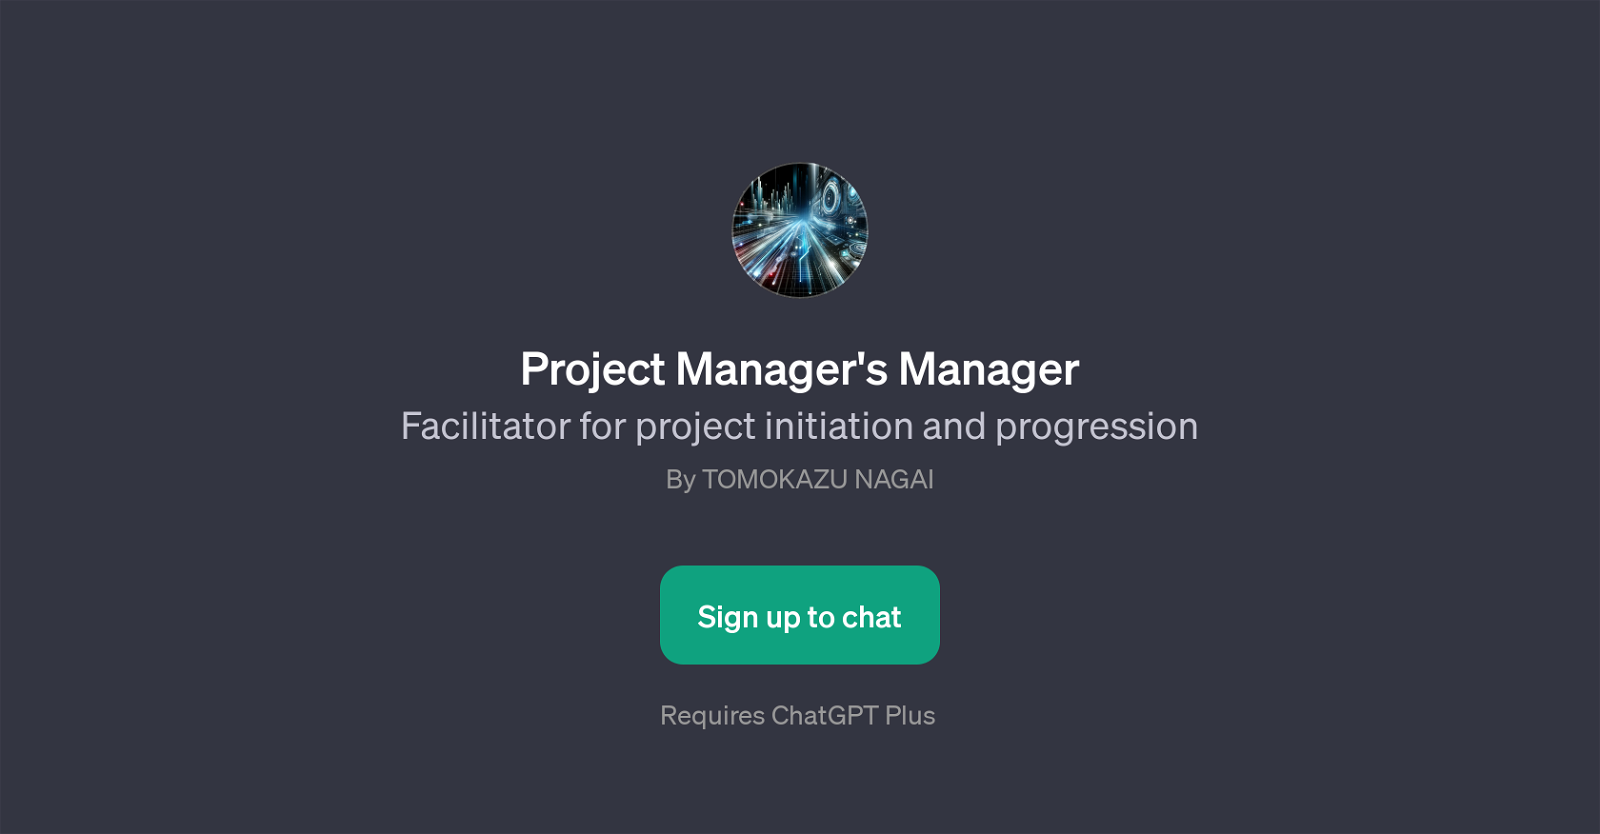 Project Manager's Manager website